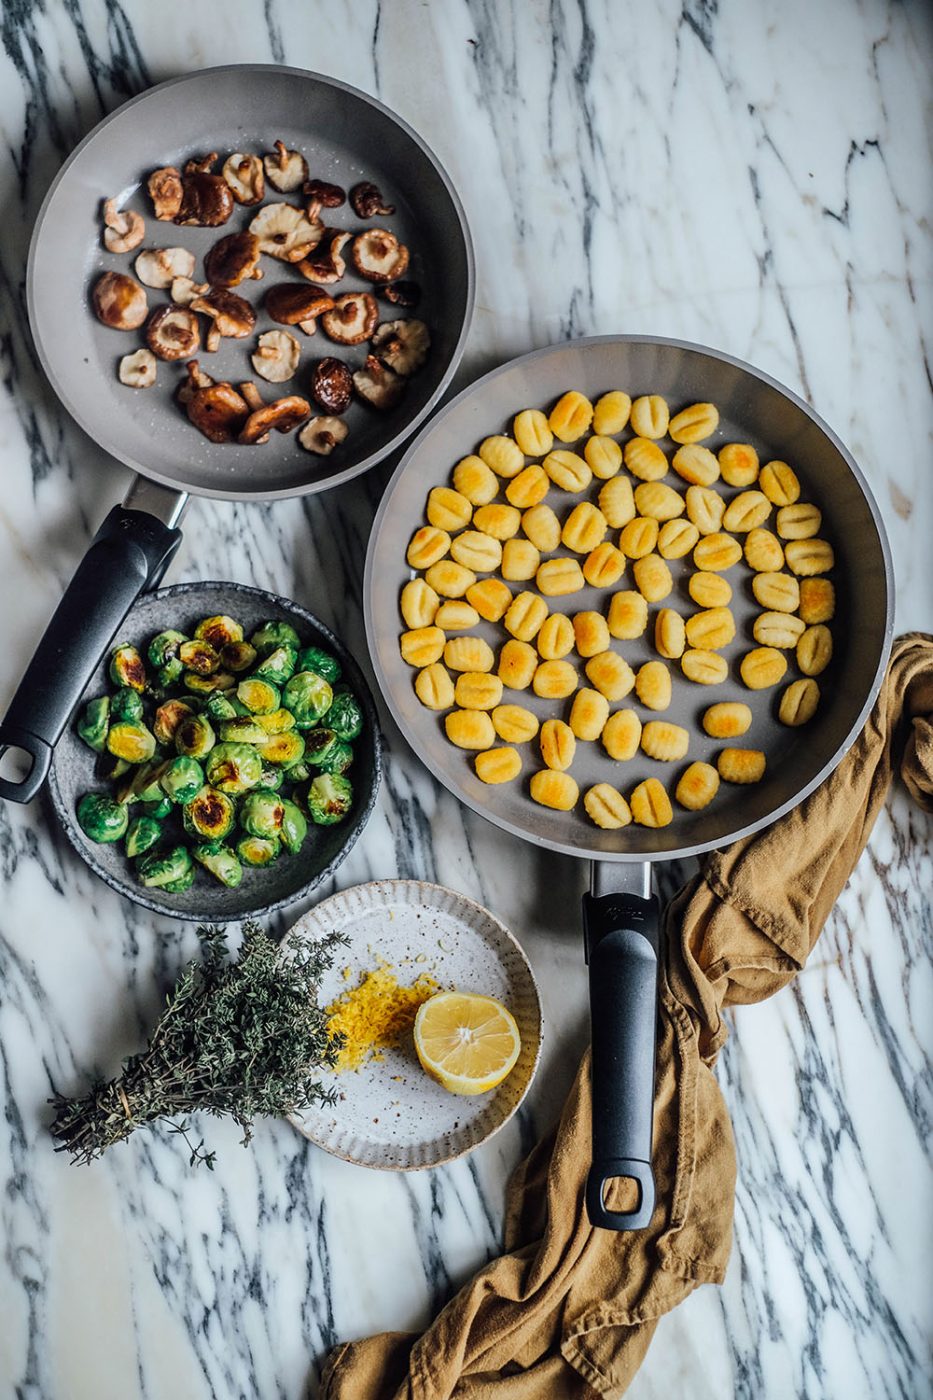 Gluten-free gnocchi with Brussel Sprouts